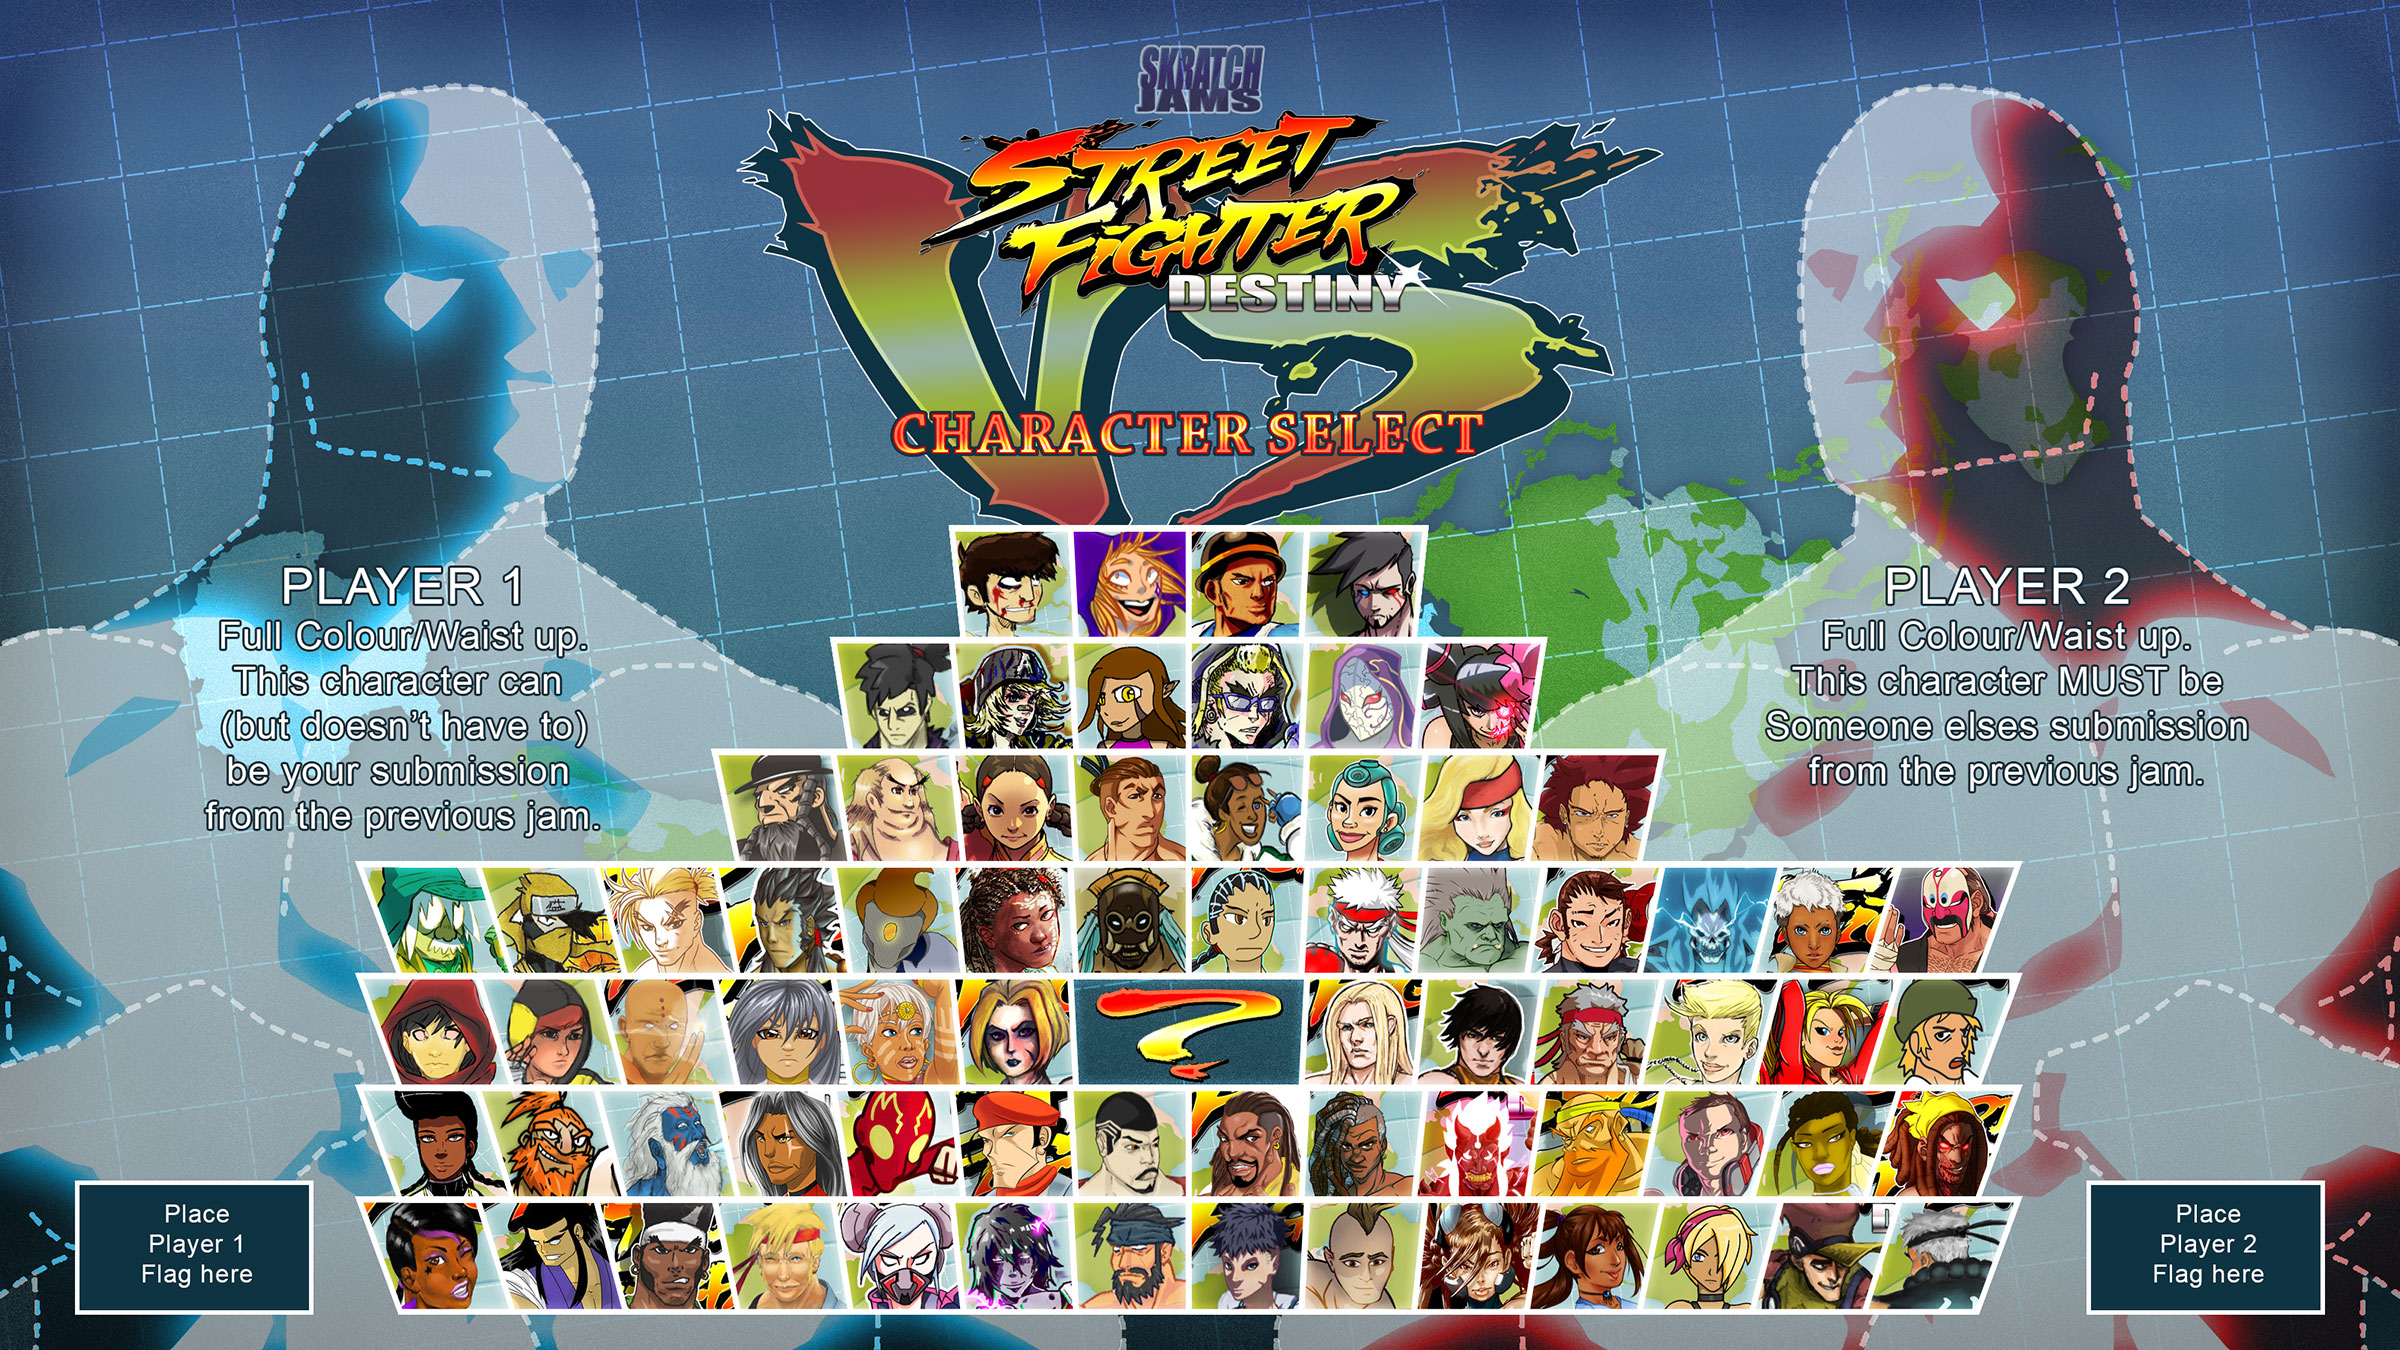 the-daily-low-price-street-fighter-character-menu-select-poster-24x36